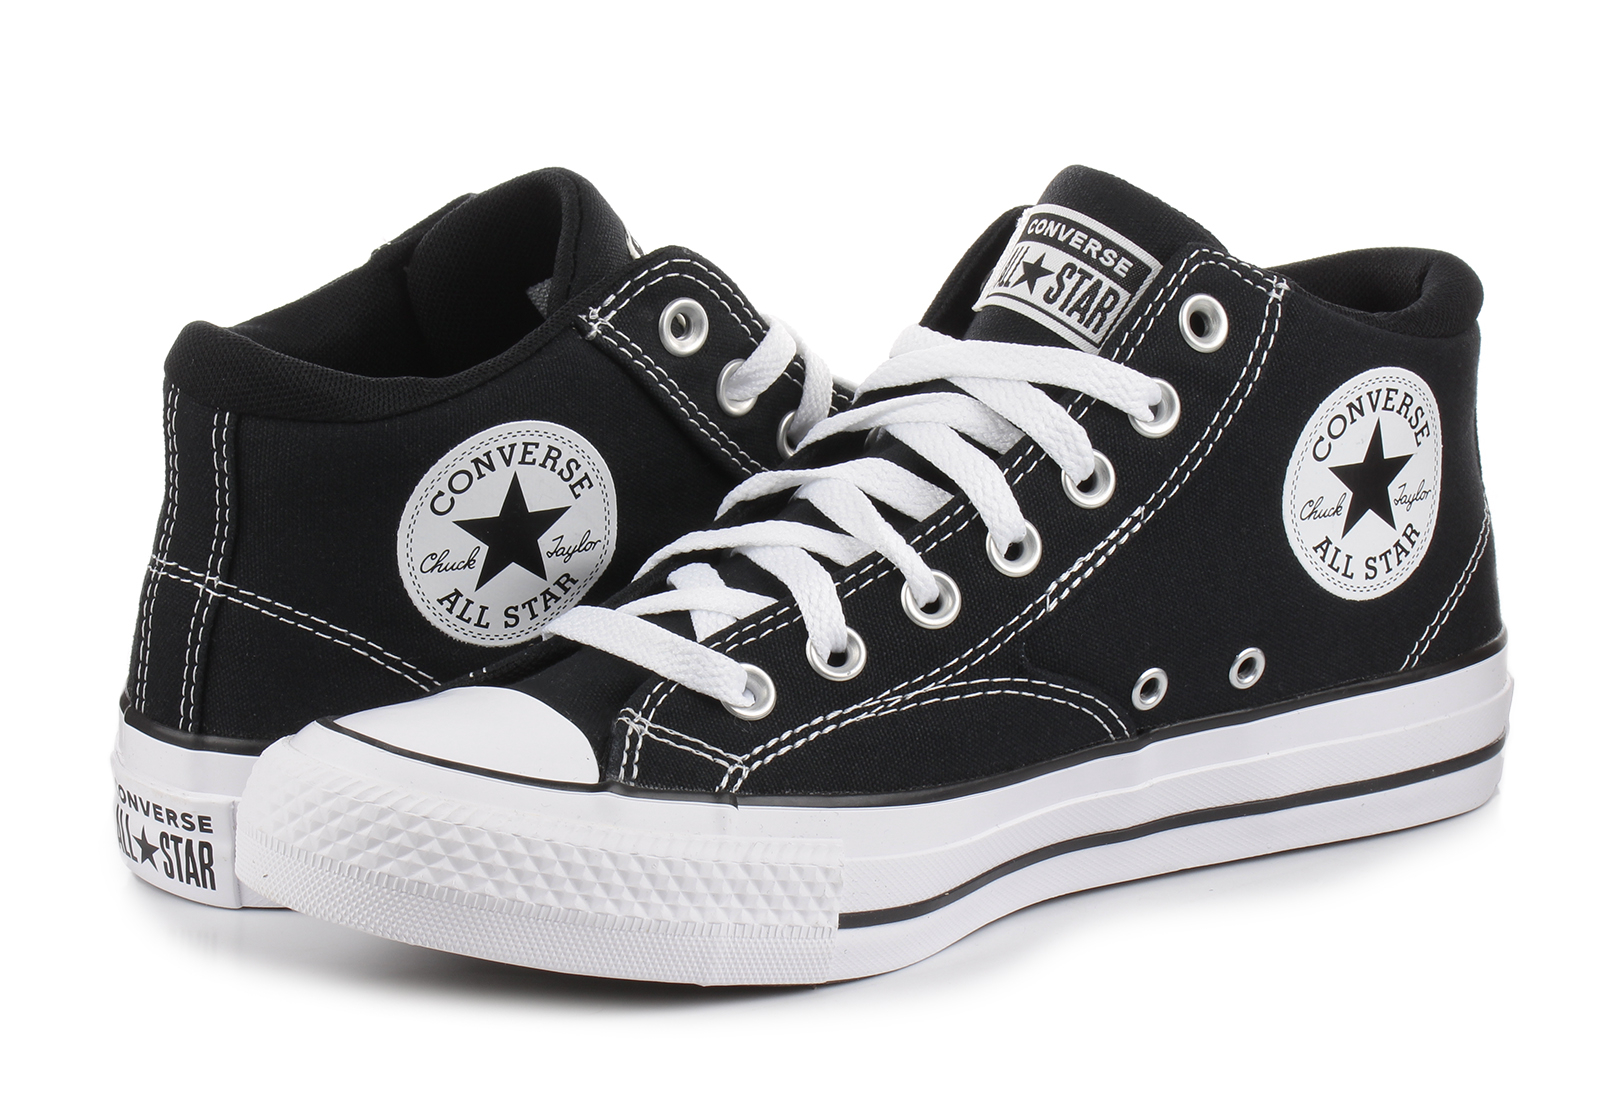 Converse High - shop shoes - A00811C and - boots Street sneakers, All Malden Online Chuck Star trainers Taylor for